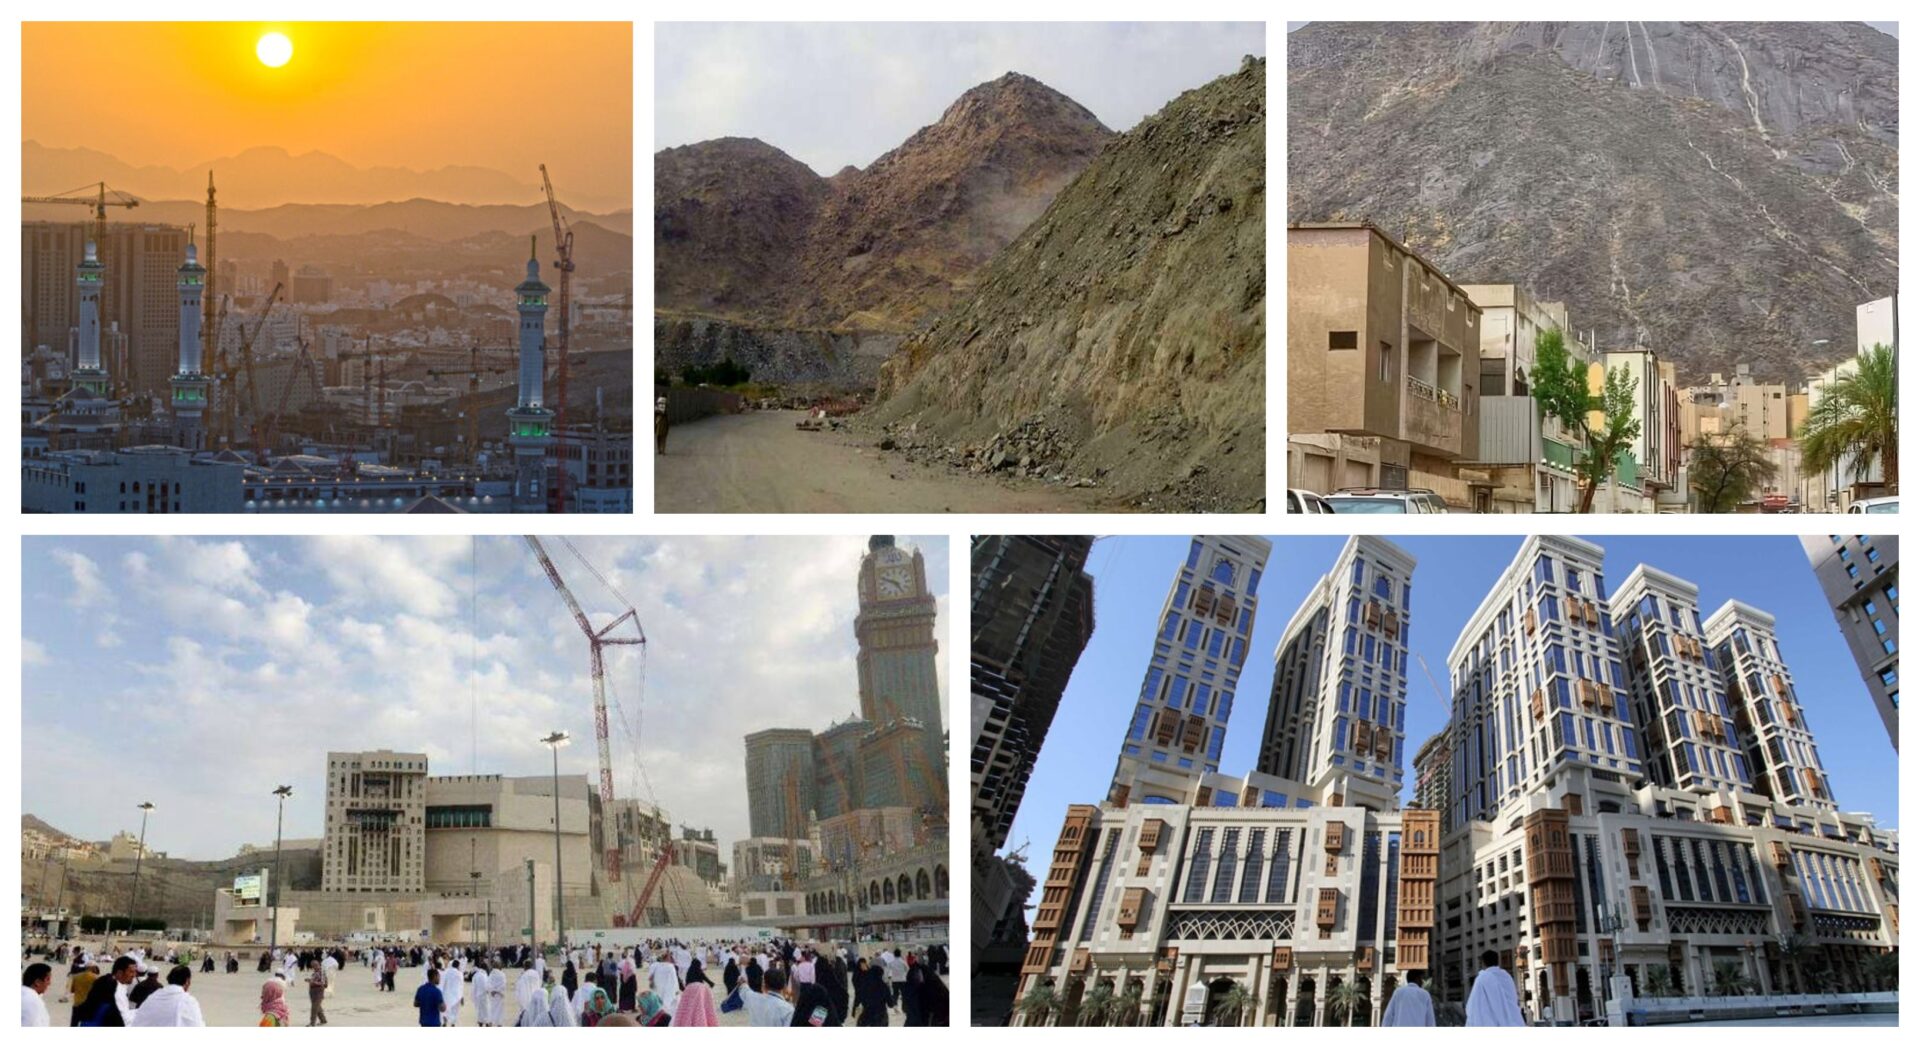 7 Historical Islamic Mountains In Makkah You Must Visit